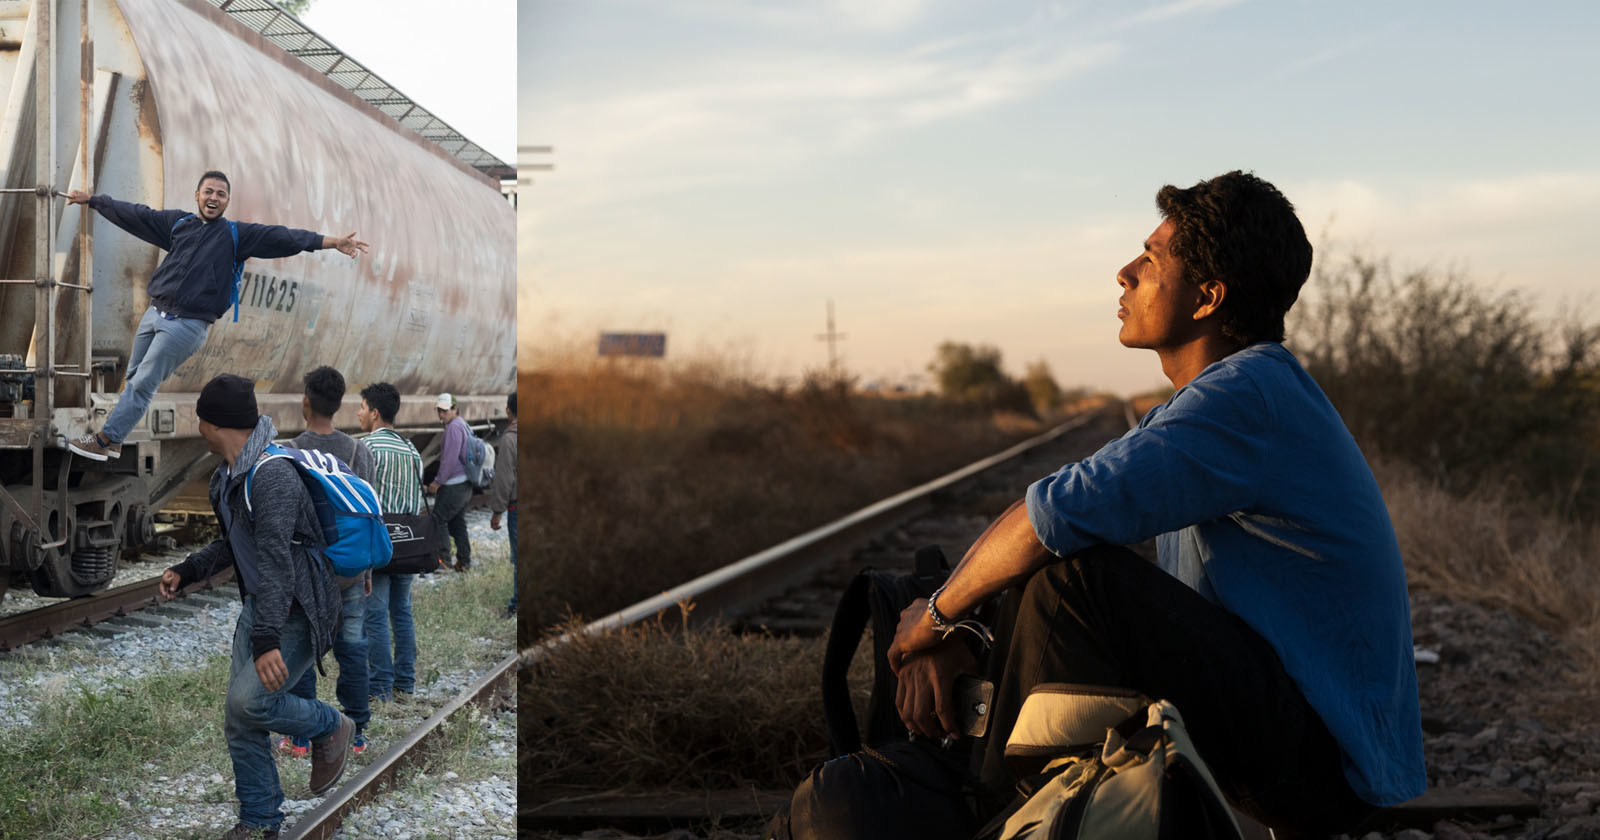  photographer documenting migrants was detained during his project 